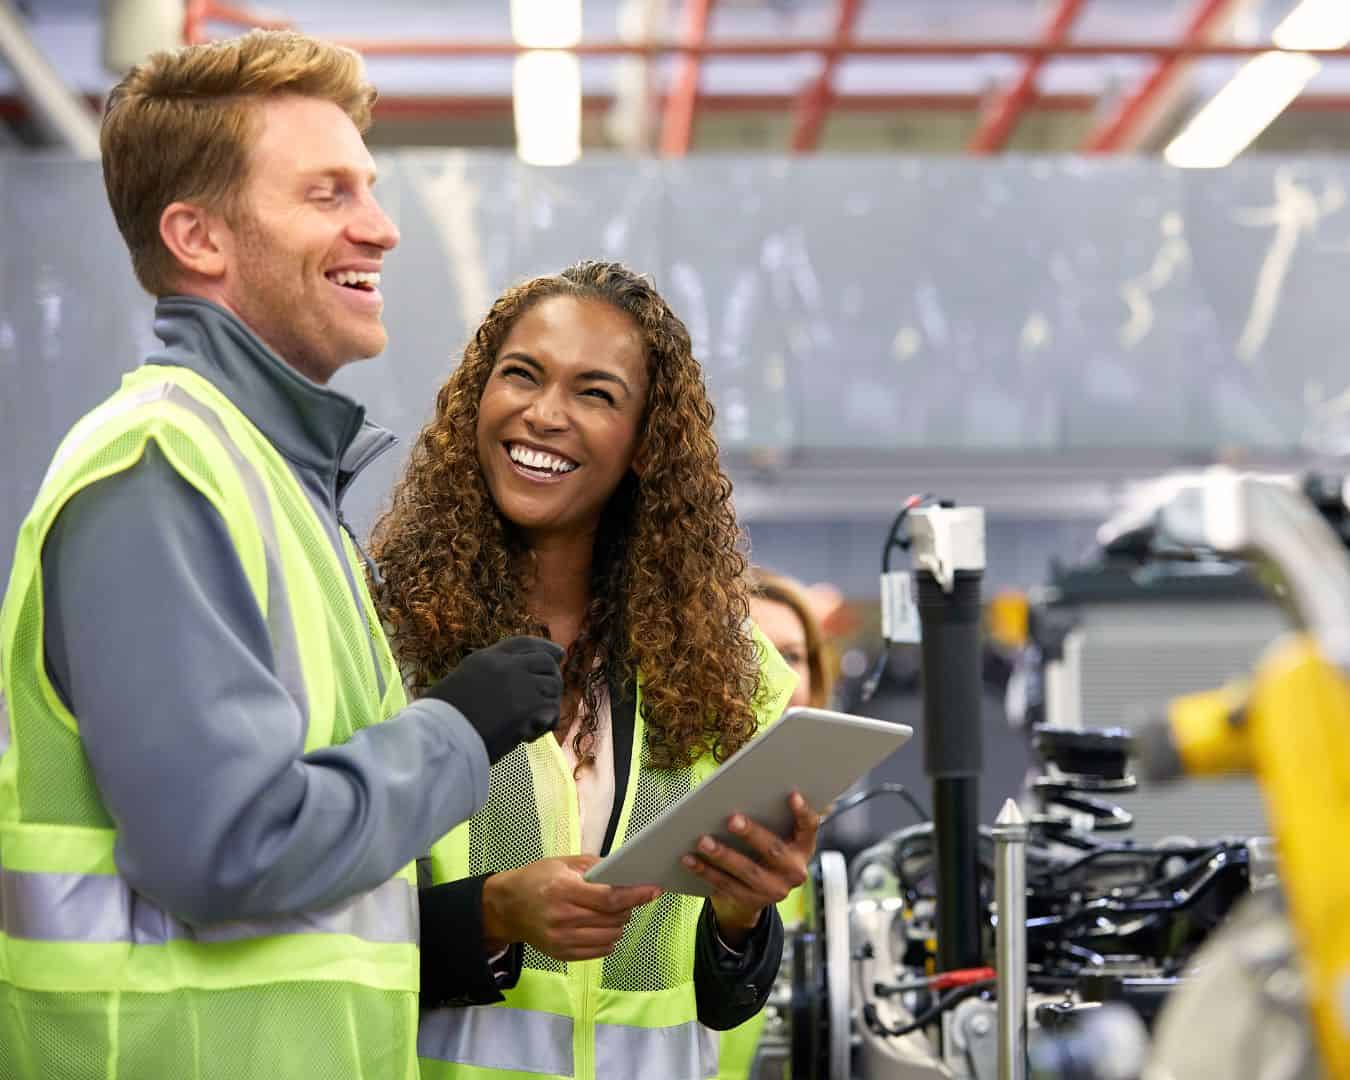 A joyful moment captured between two team members in high-visibility vests on the manufacturing floor, as they review data on a tablet, reflecting the positive team dynamics and quality-centric culture vital for industrial excellence.